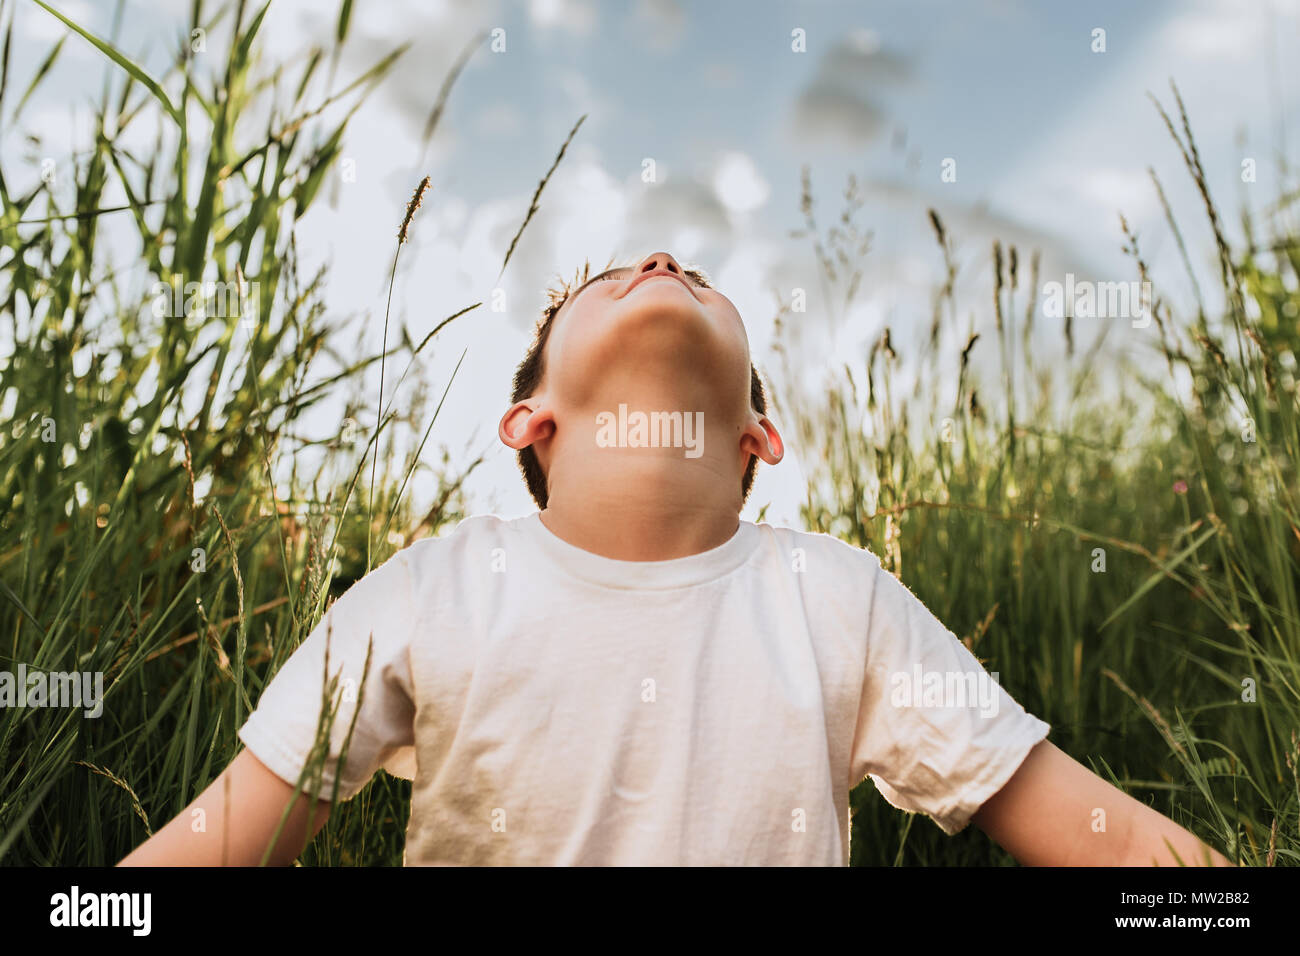 young boy sitting in a field of tall grass looking up at the sky Stock Photo